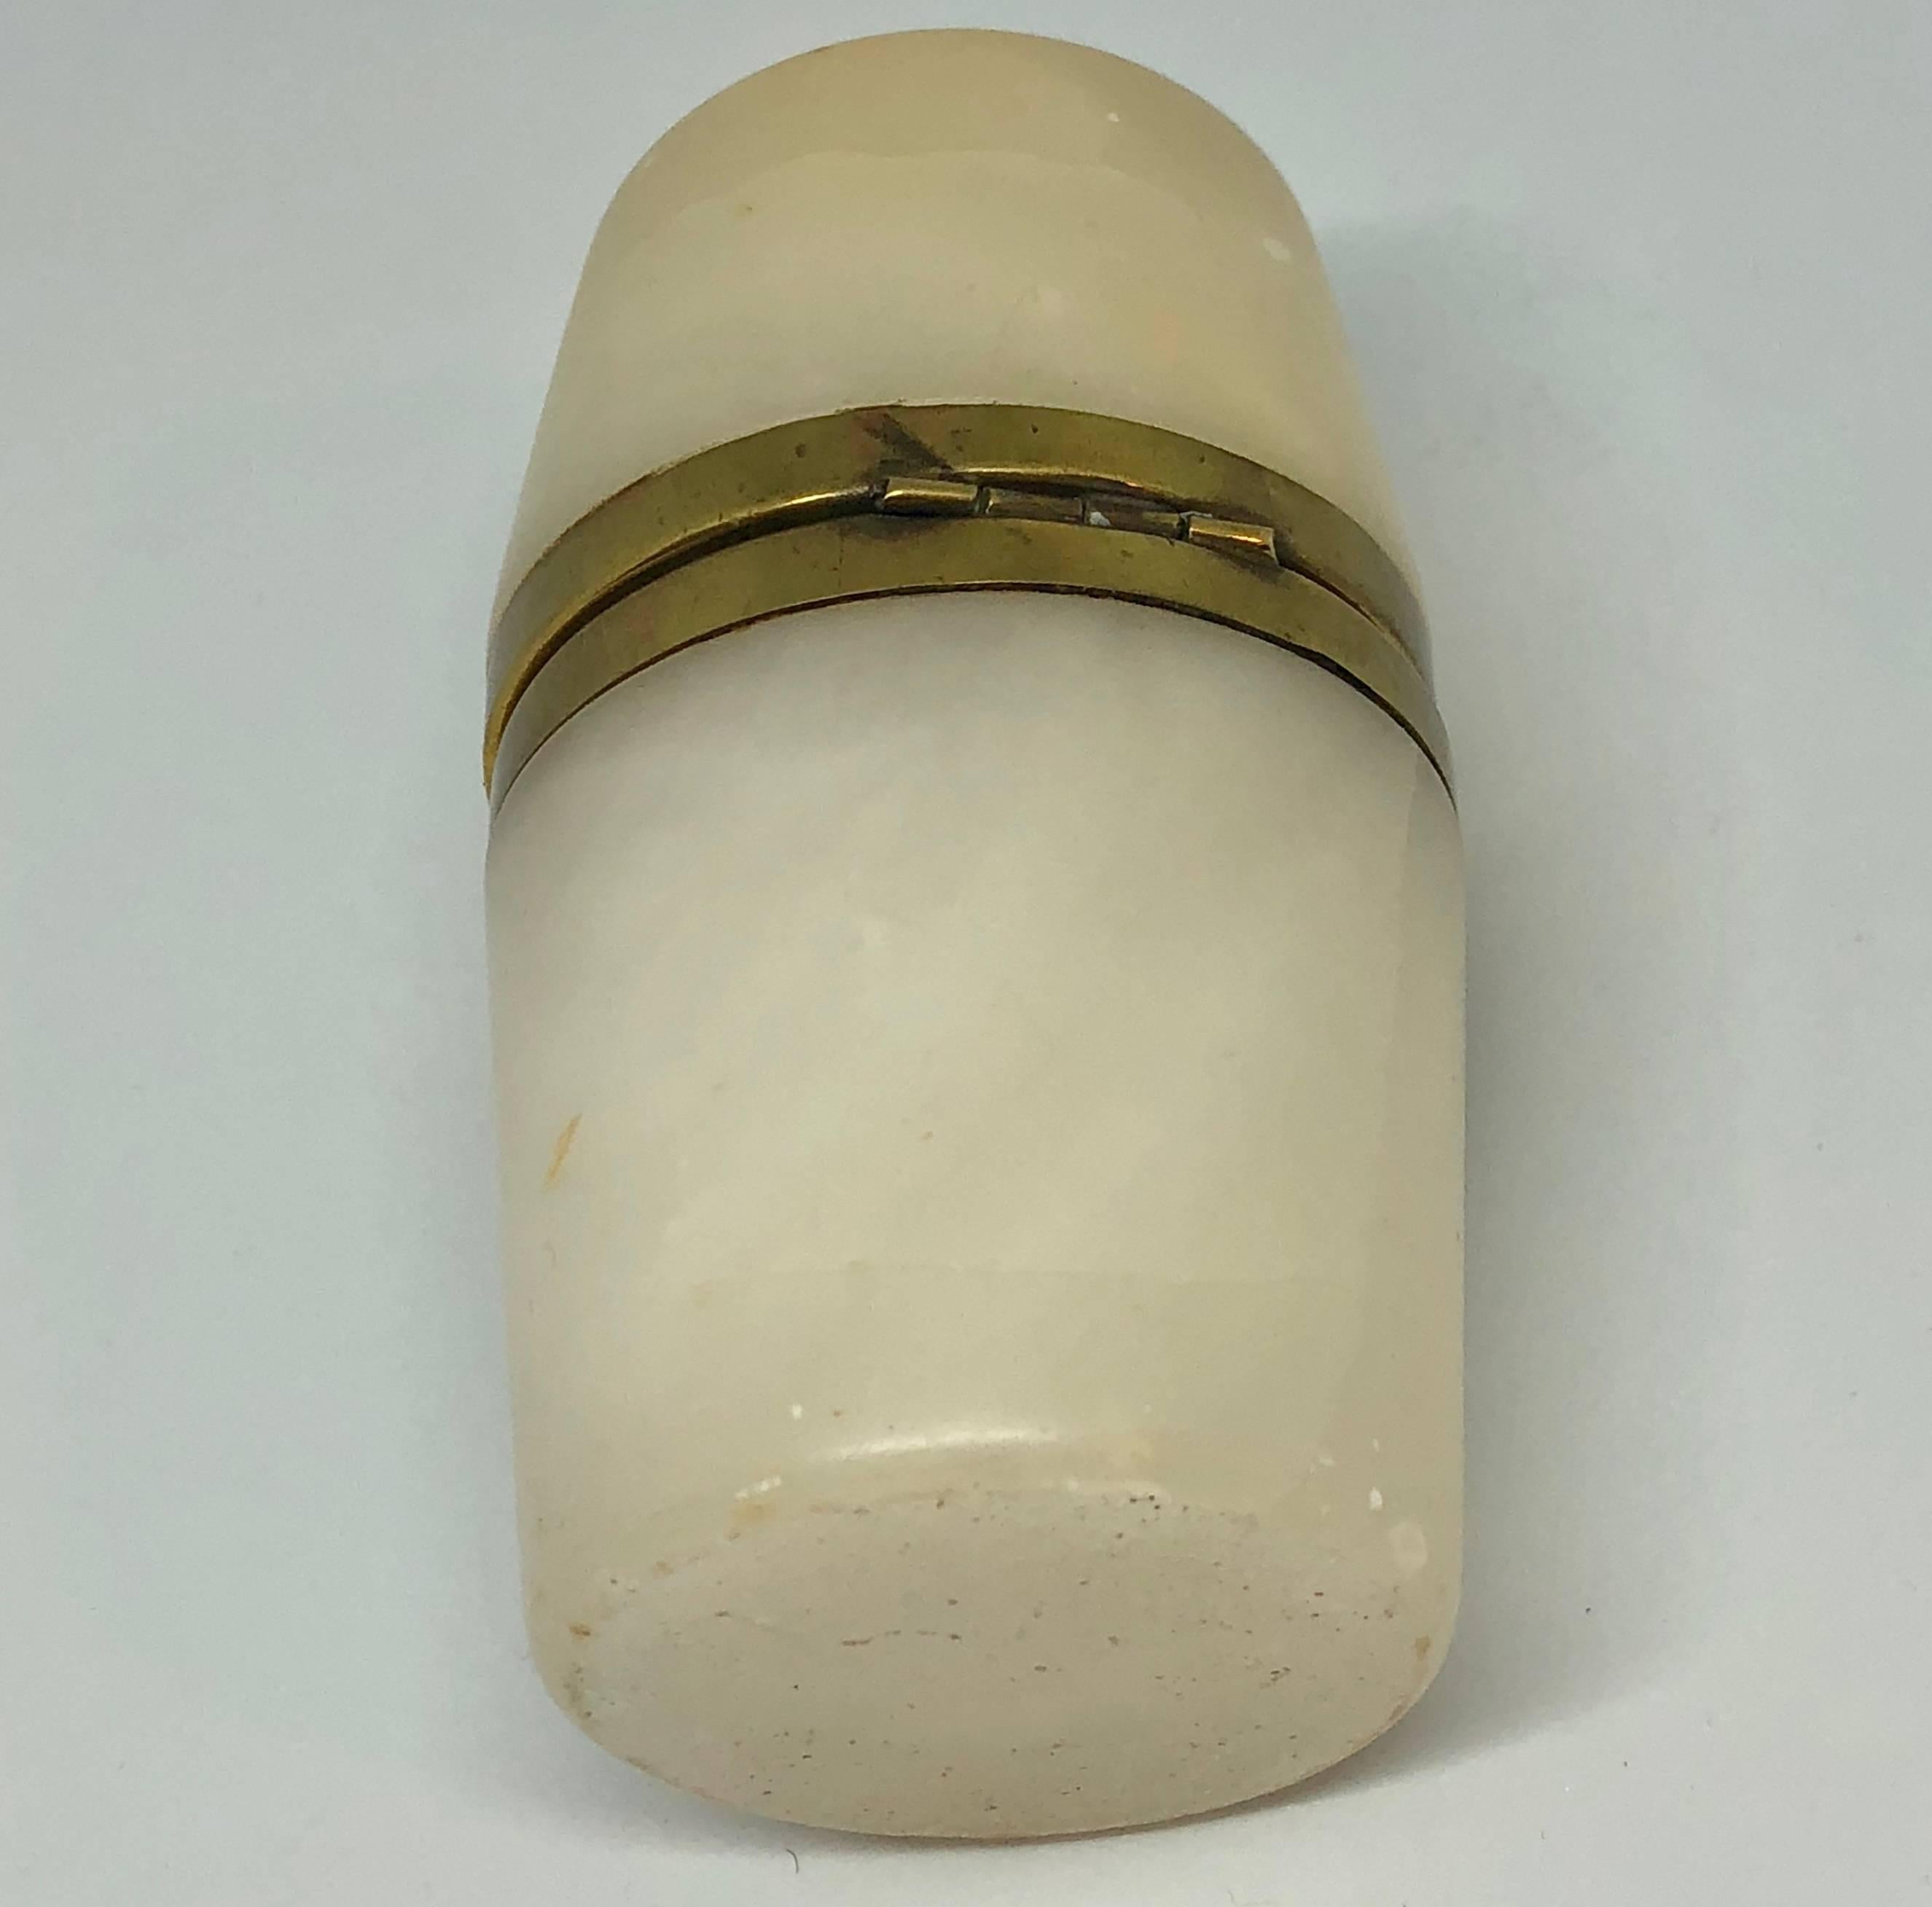 Small 18th Century Alabaster Barrel Shaped Jewelry Box W/ Brass Hands Decor For Sale 7